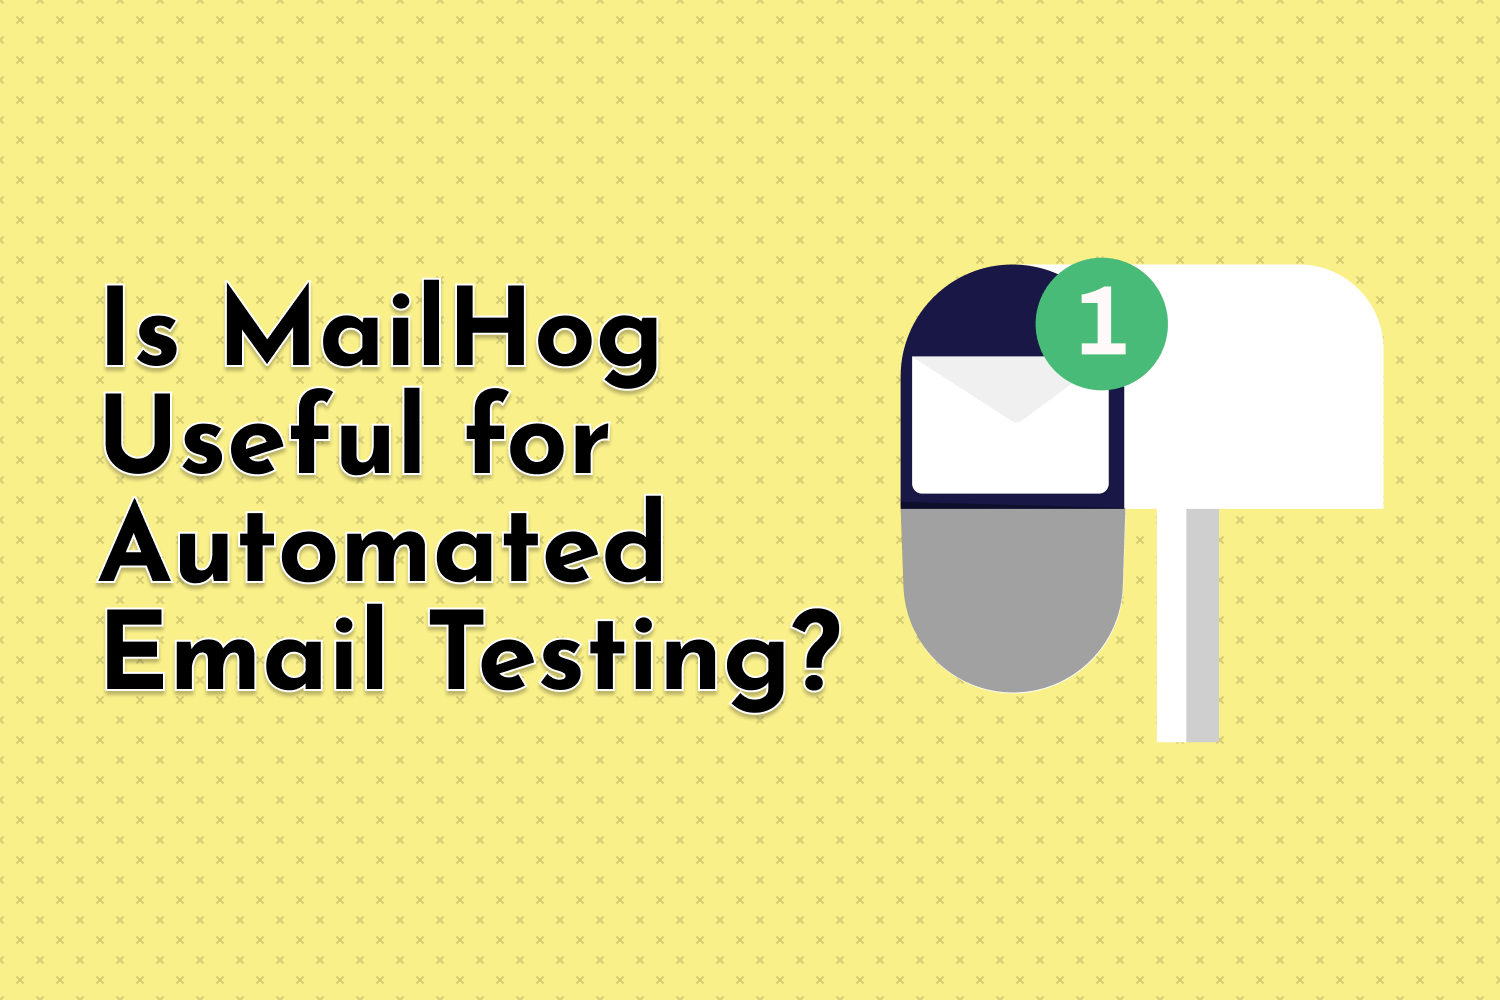 Is MailHog Useful for Automated Email Testing?